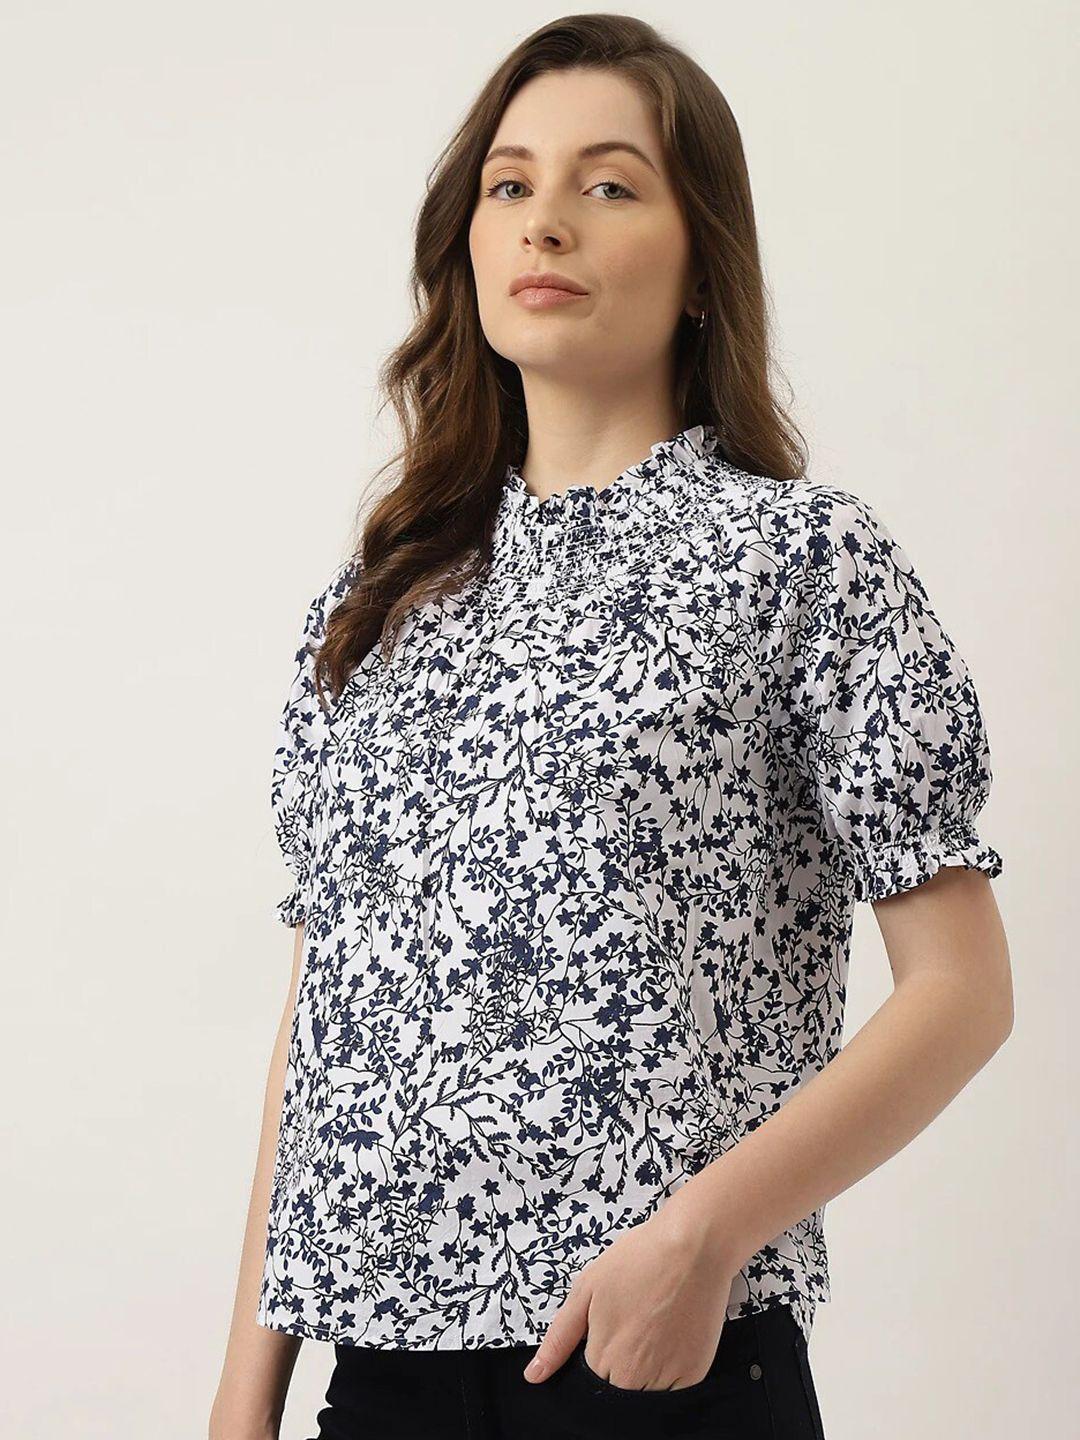 marks & spencer floral printed pure cotton top